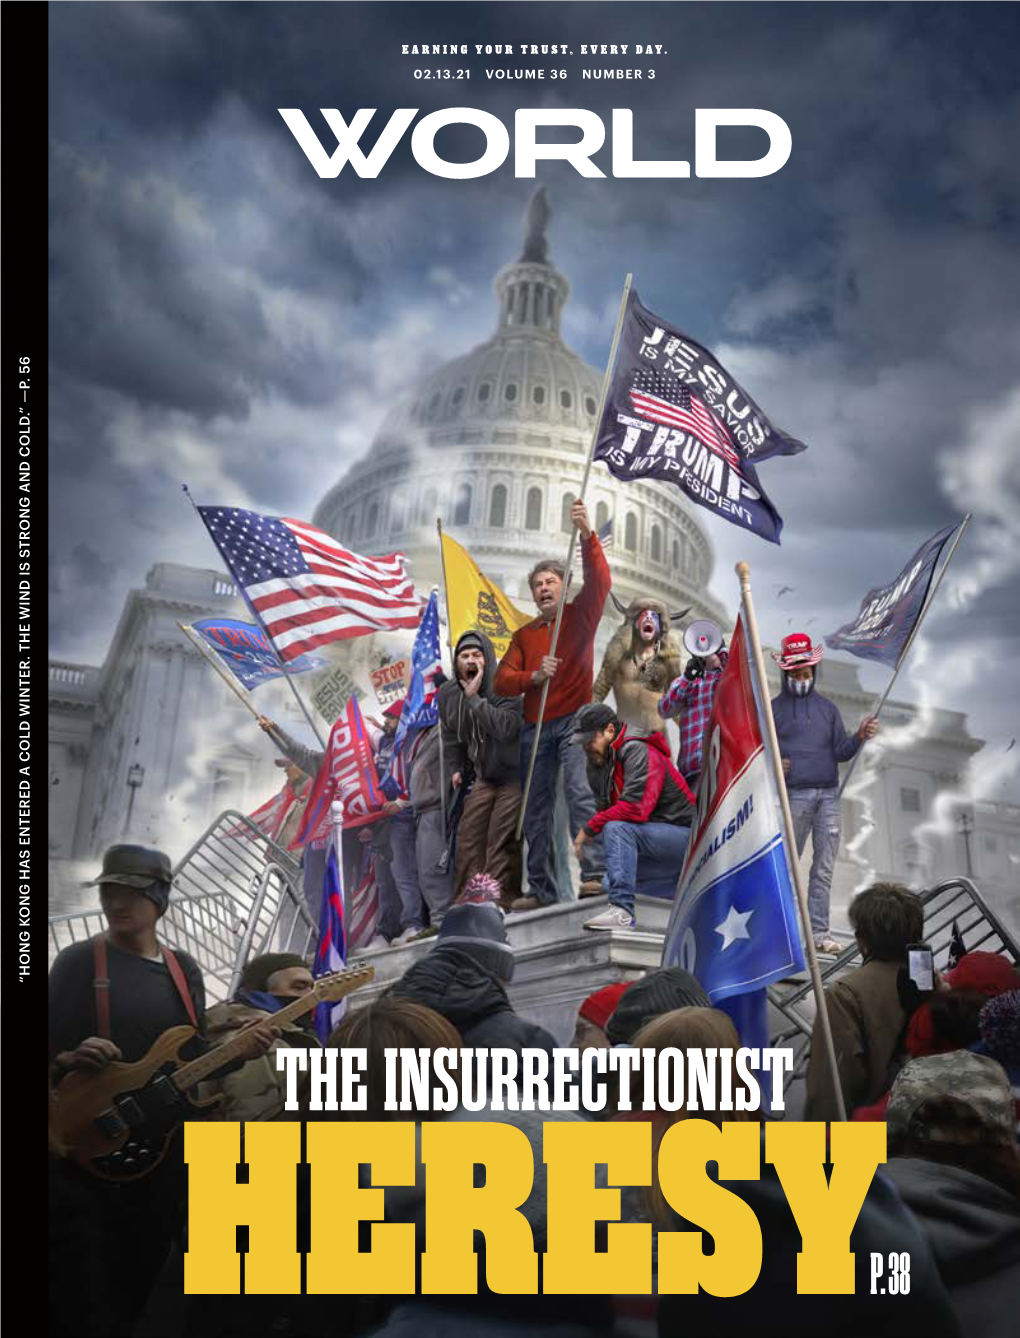 THE INSURRECTIONIST HERESYP.38 PENSACOLA CHRISTIAN COLLEGER COLLEGE VISIT OPTIONS DESIGNED for YOU Virtual